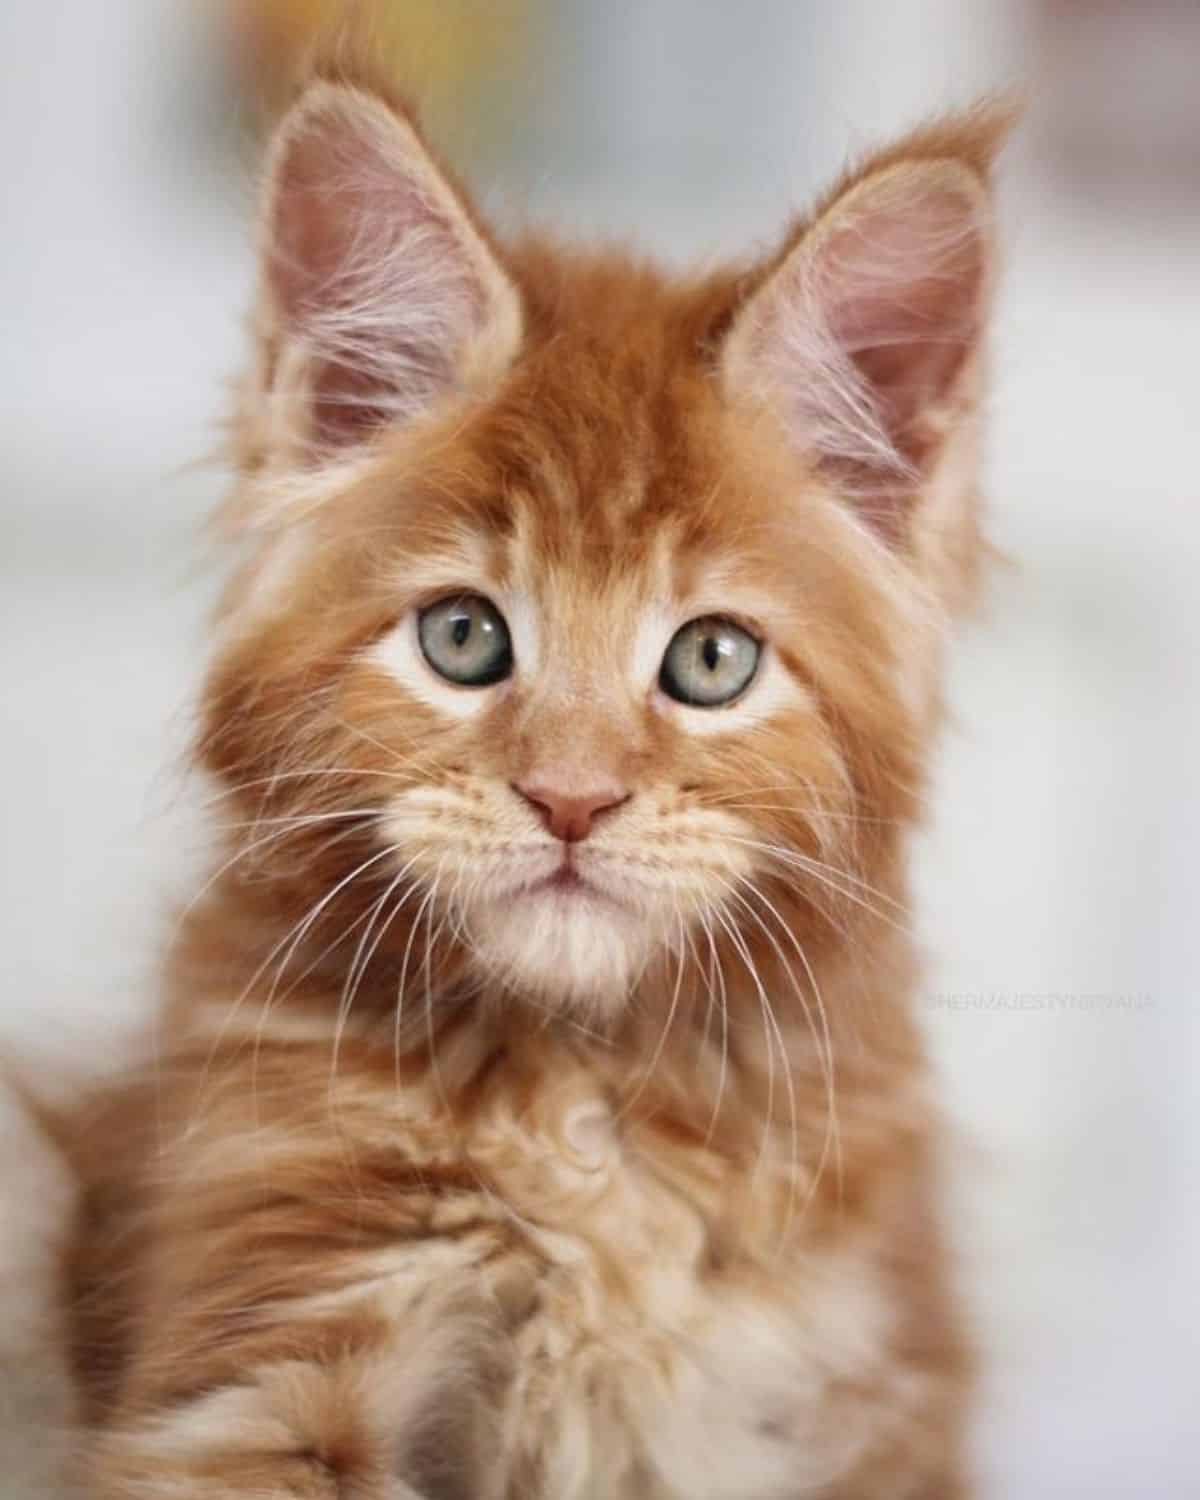 A cute red maine coon kitten starring into a camera lense.